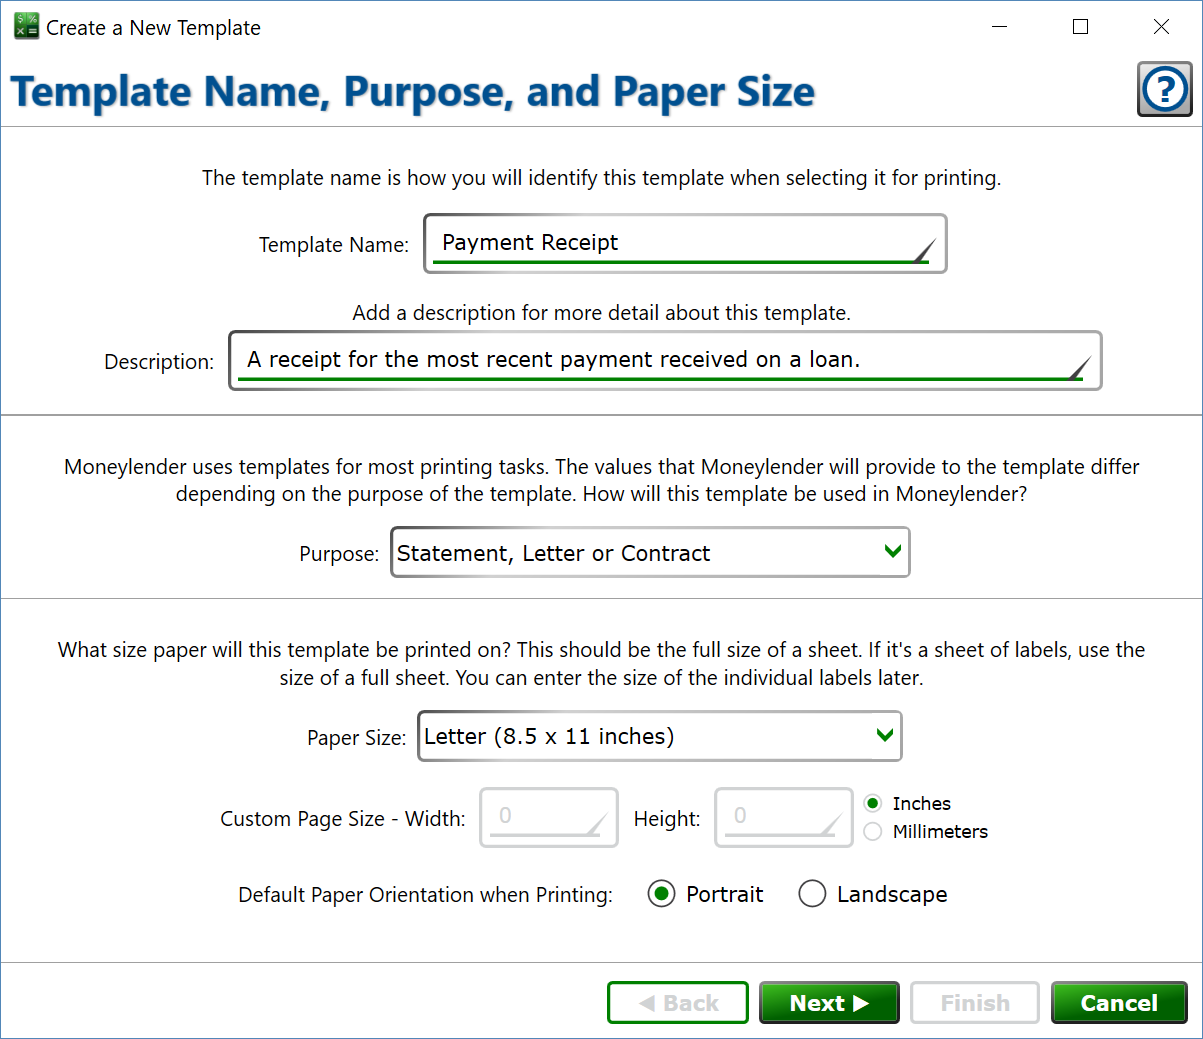 Screenshot of the Template Name, Purpose and Paper Size window.